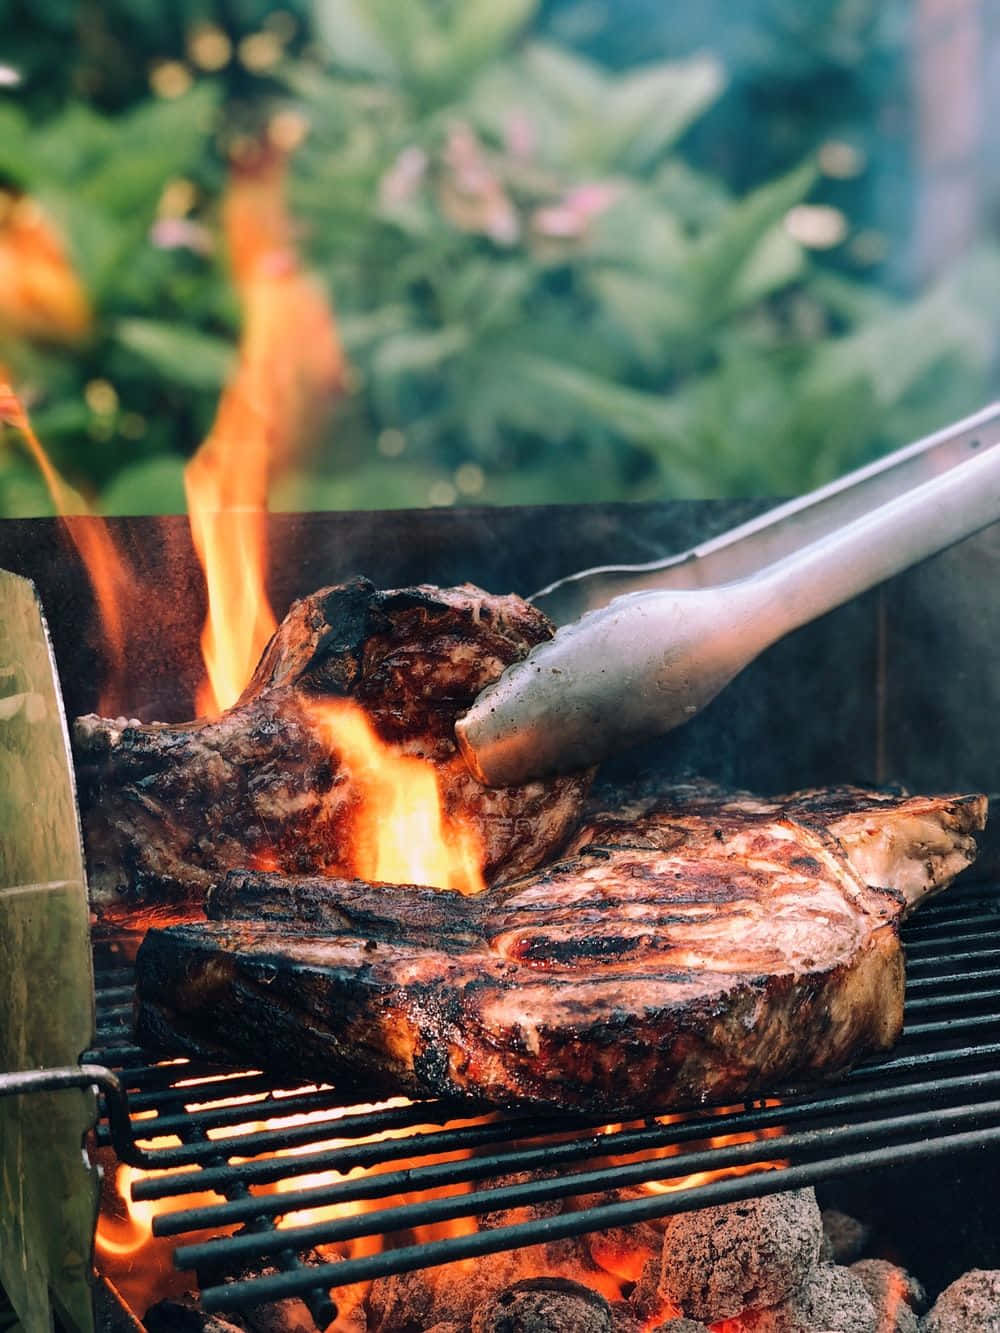 Get Ready to Cook the Perfect BBQ Feast!